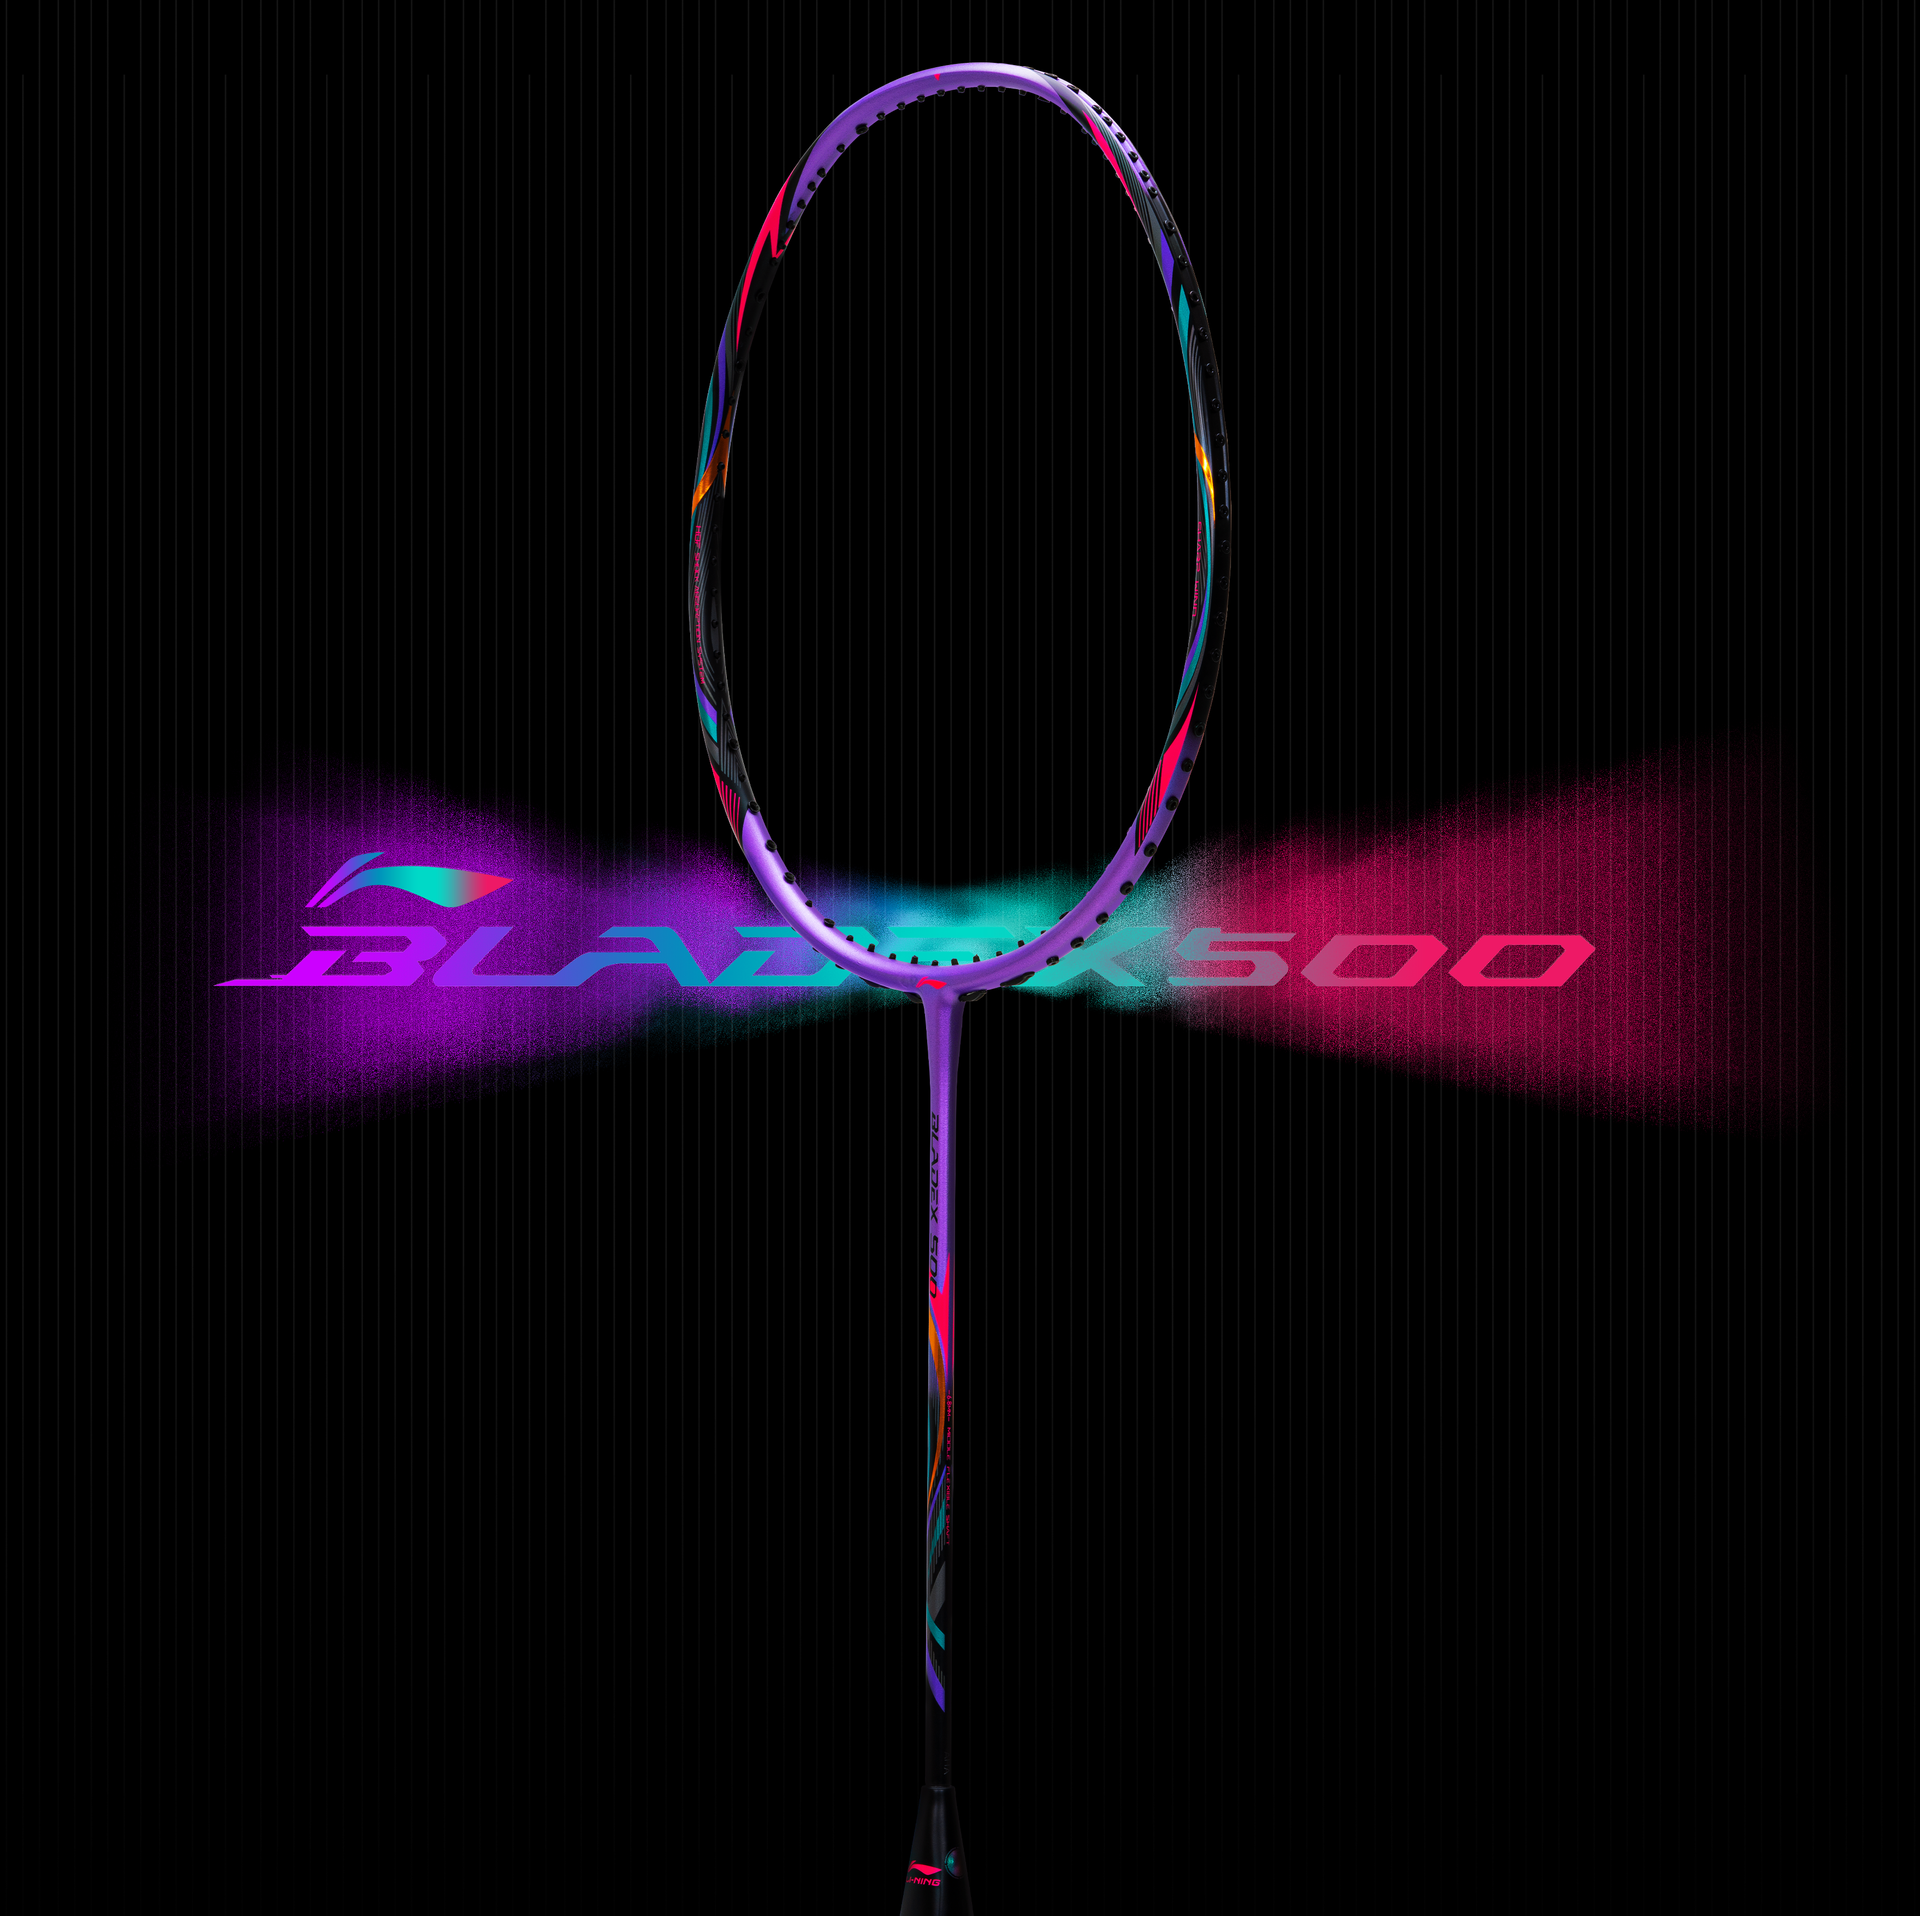 Blade X 500 - The pioneer's weapon.